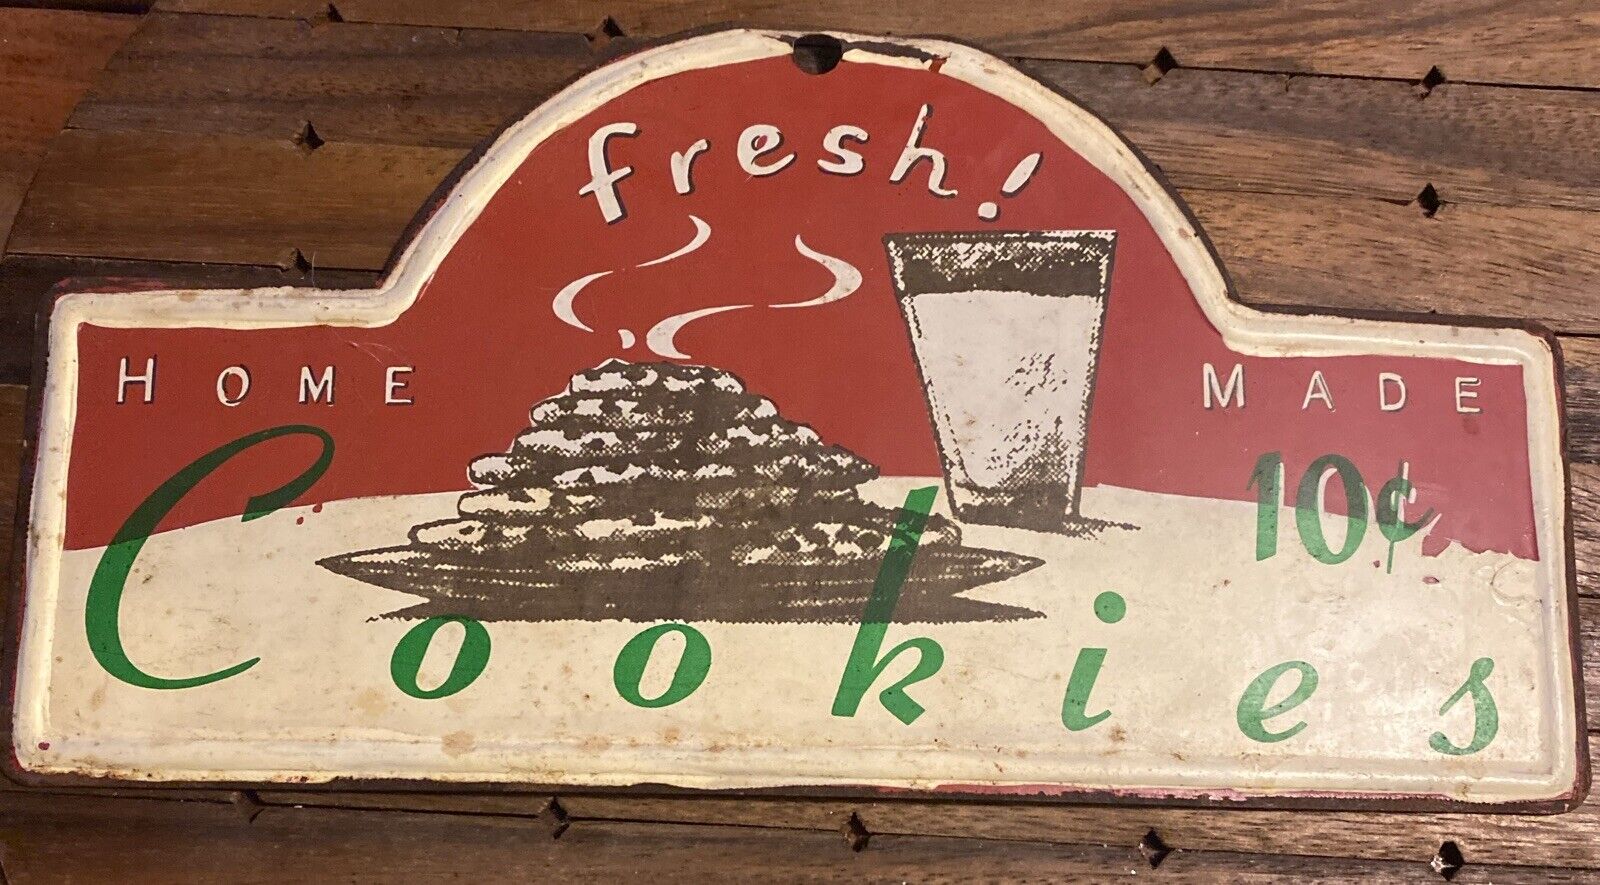 Vintage Retro Homemade Fresh Made Cookies 10 Cents  Metal Sign 12” x 6”